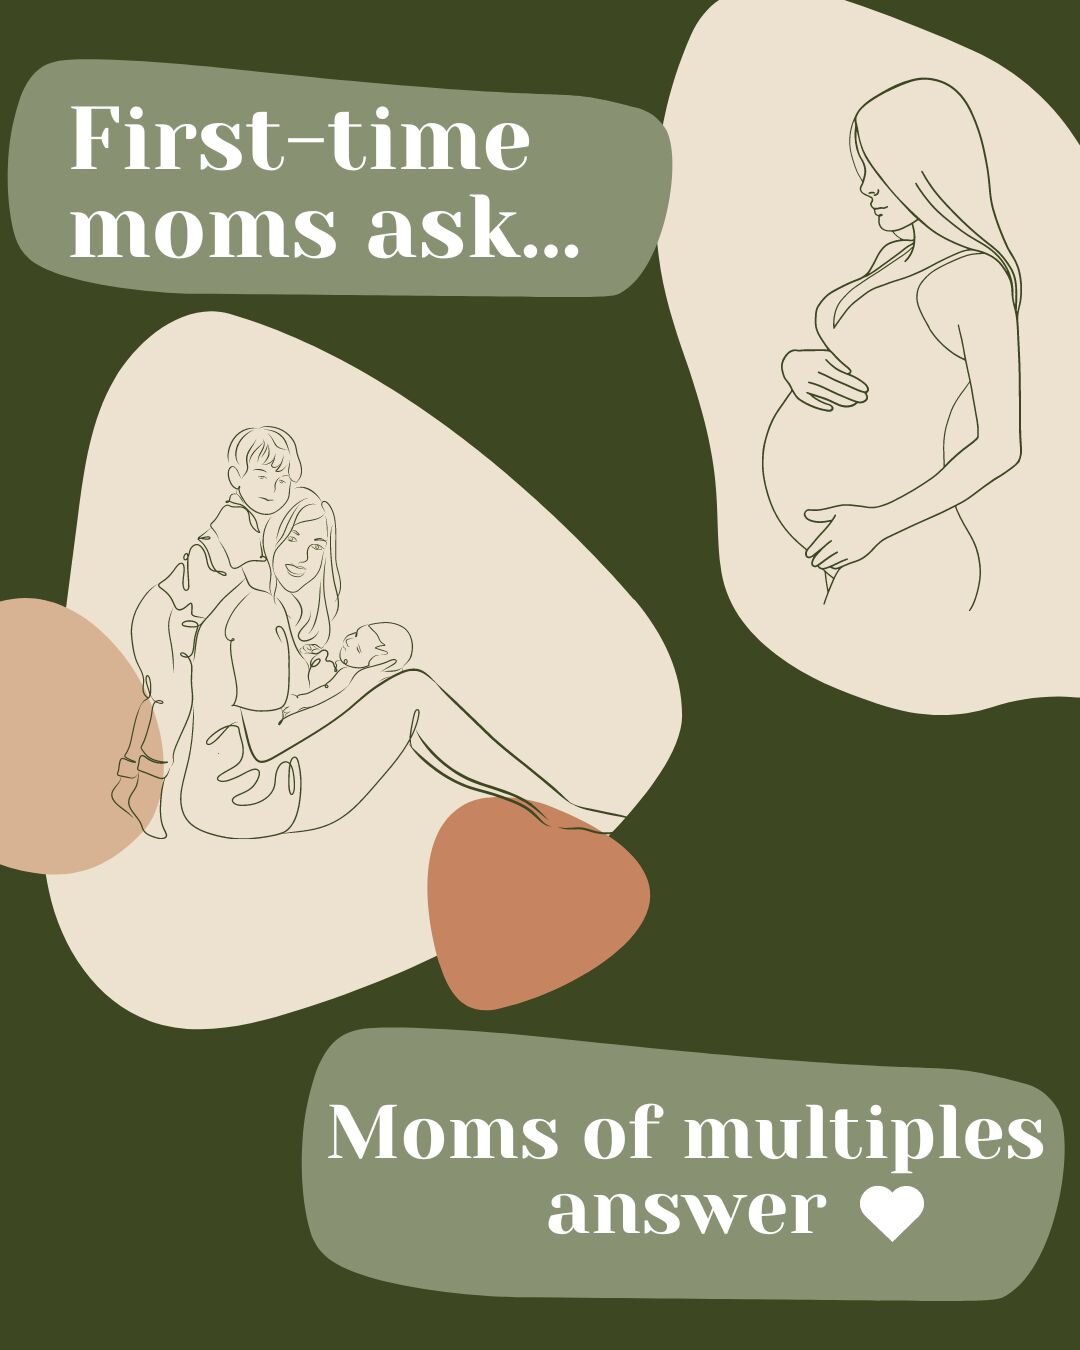 First time moms&mdash;in a world of over information and opinions, it can feel overwhelming to find what is ACTUALLY important!  Nows your chance, ask the questions you have been dying to know&hellip;

What do I actually need to know to prepare for b